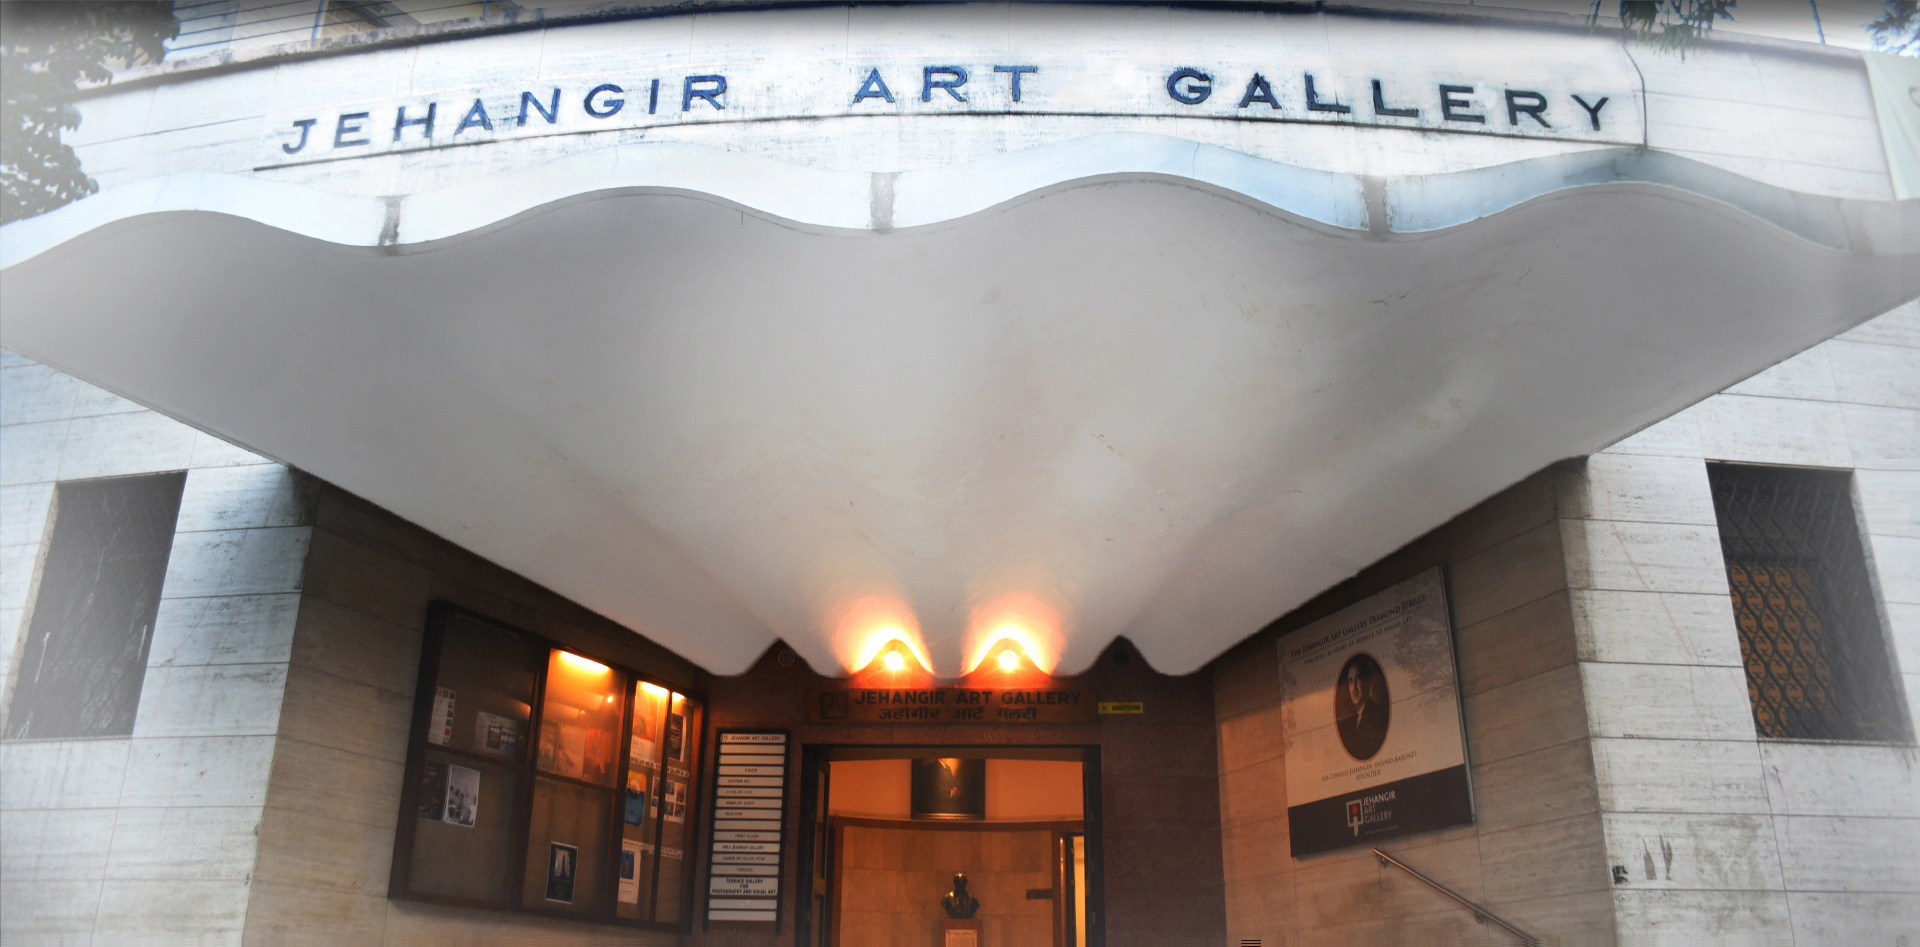 Jehangir Art Gallery is situated  near in South Mumbai near the best hotels in town and has four exhibition halls.